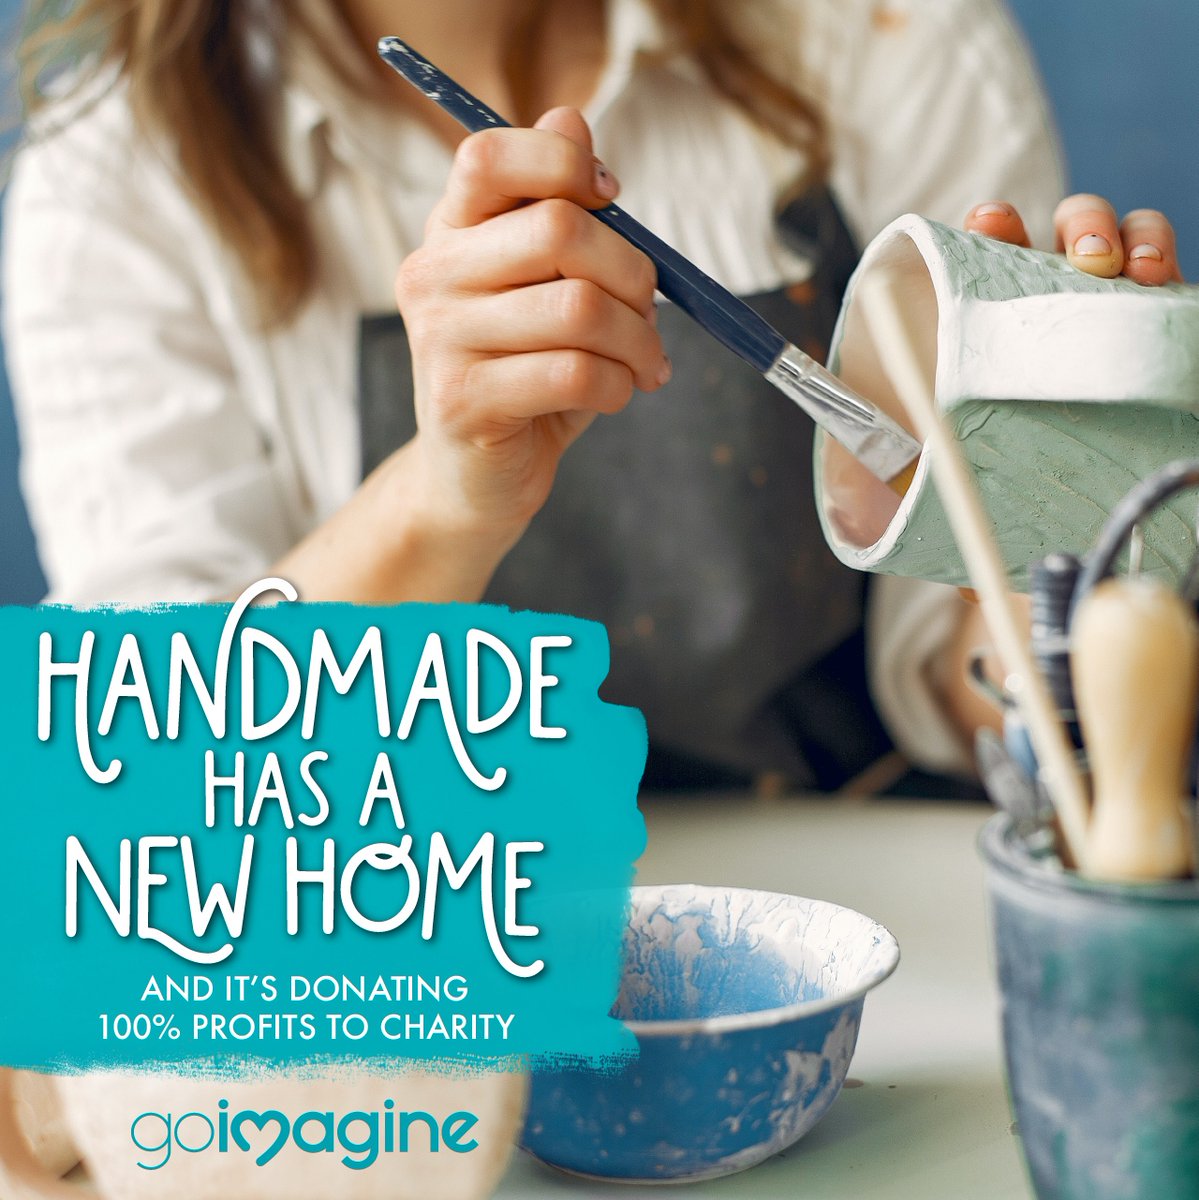 Buy & Sell Handmade on a Marketplace focused on Social Good ❤️😊  Welcome to the #caringeconomy at l8r.it/81RQ

#goimagine #handmadeforgood #shopsmall #supporthandmade #handmadeseller #makerlife #handmadebusiness